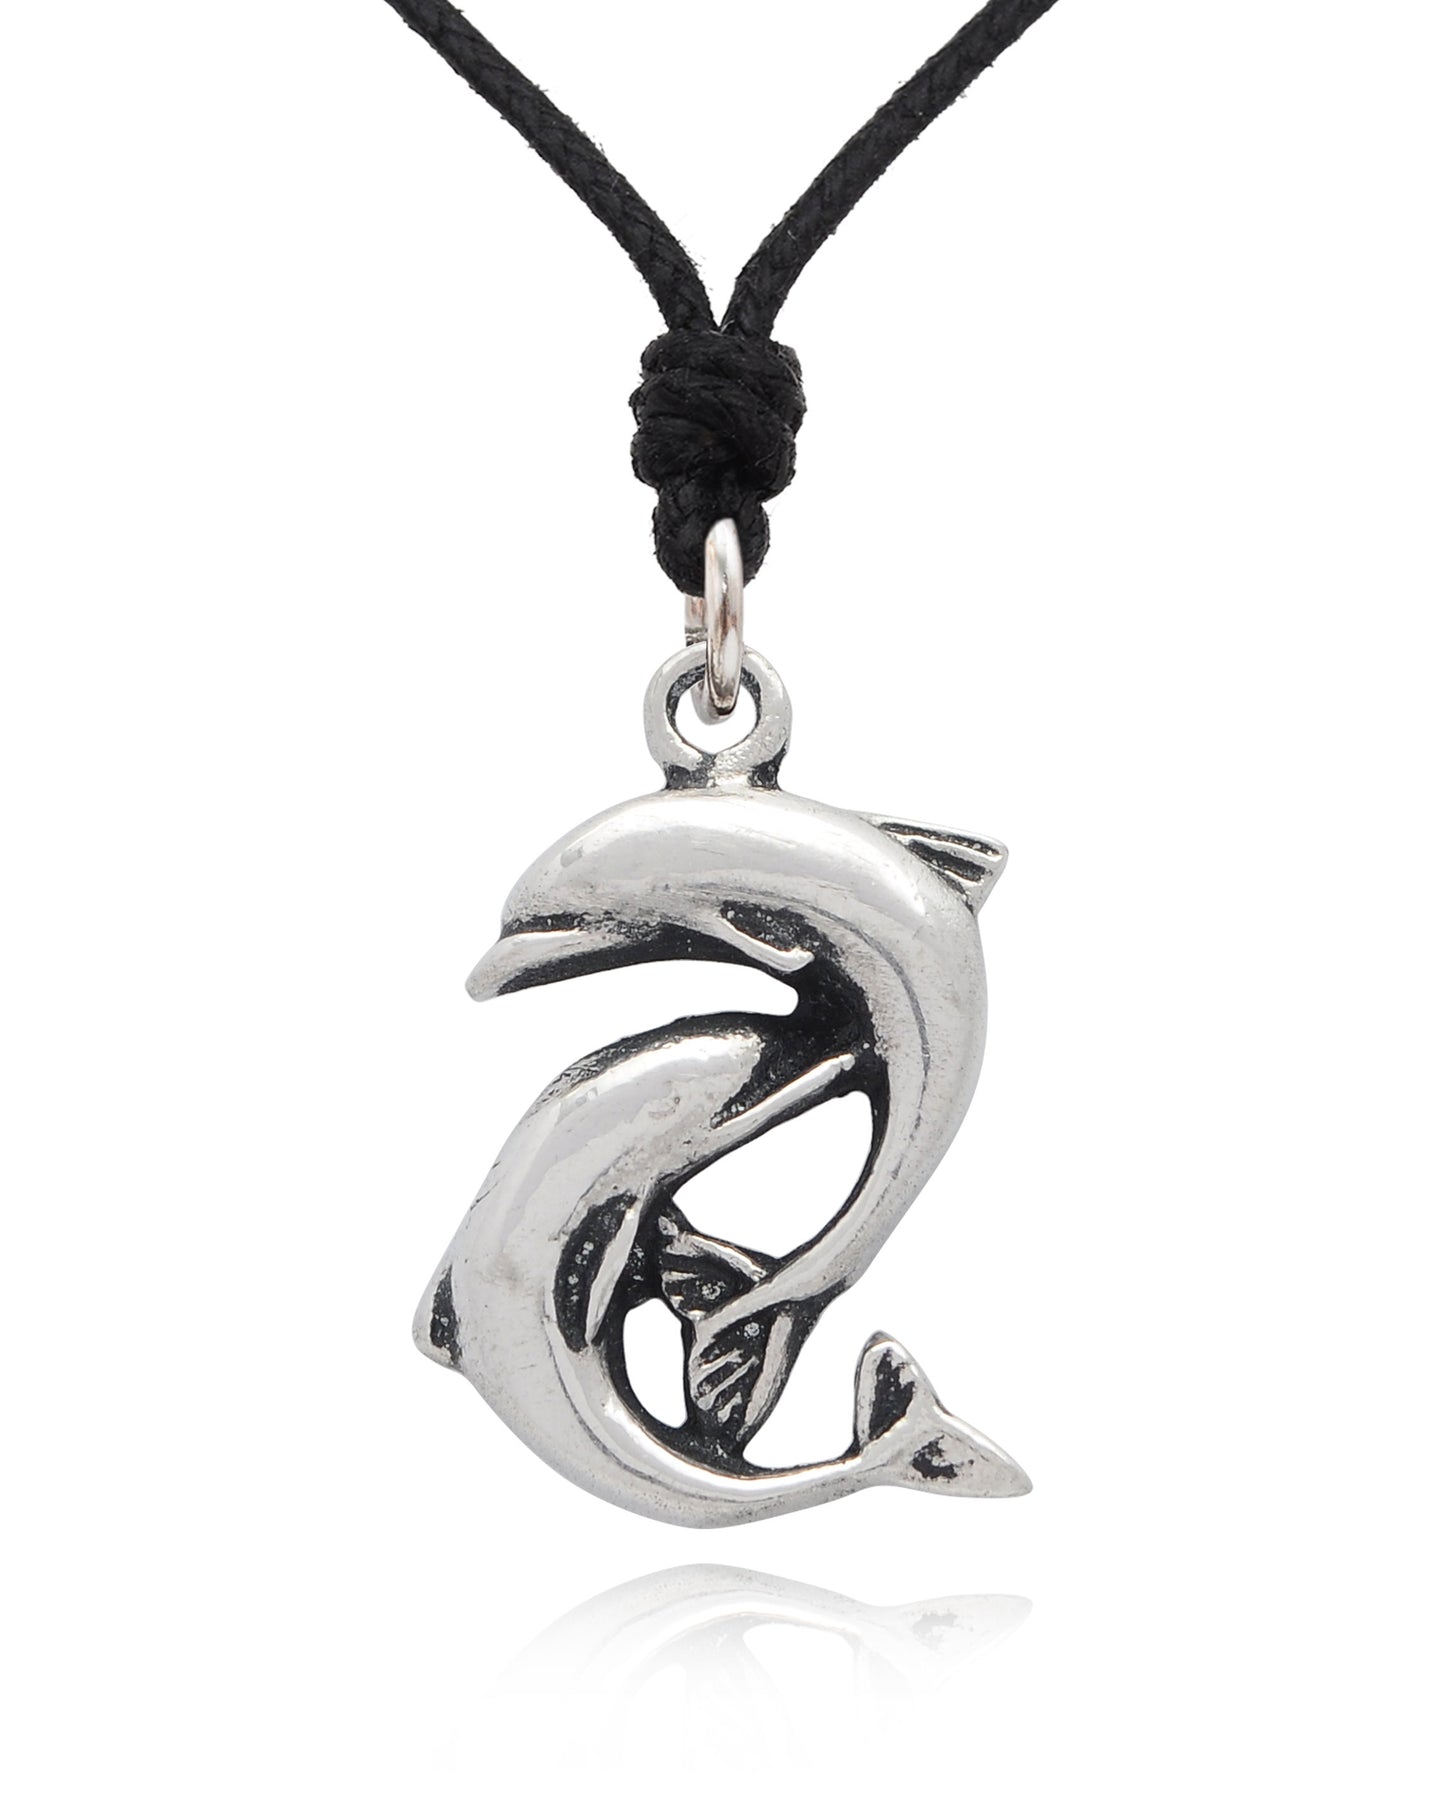 Couple Dolphin Silver Pewter Charm Necklace Pendant Jewelry